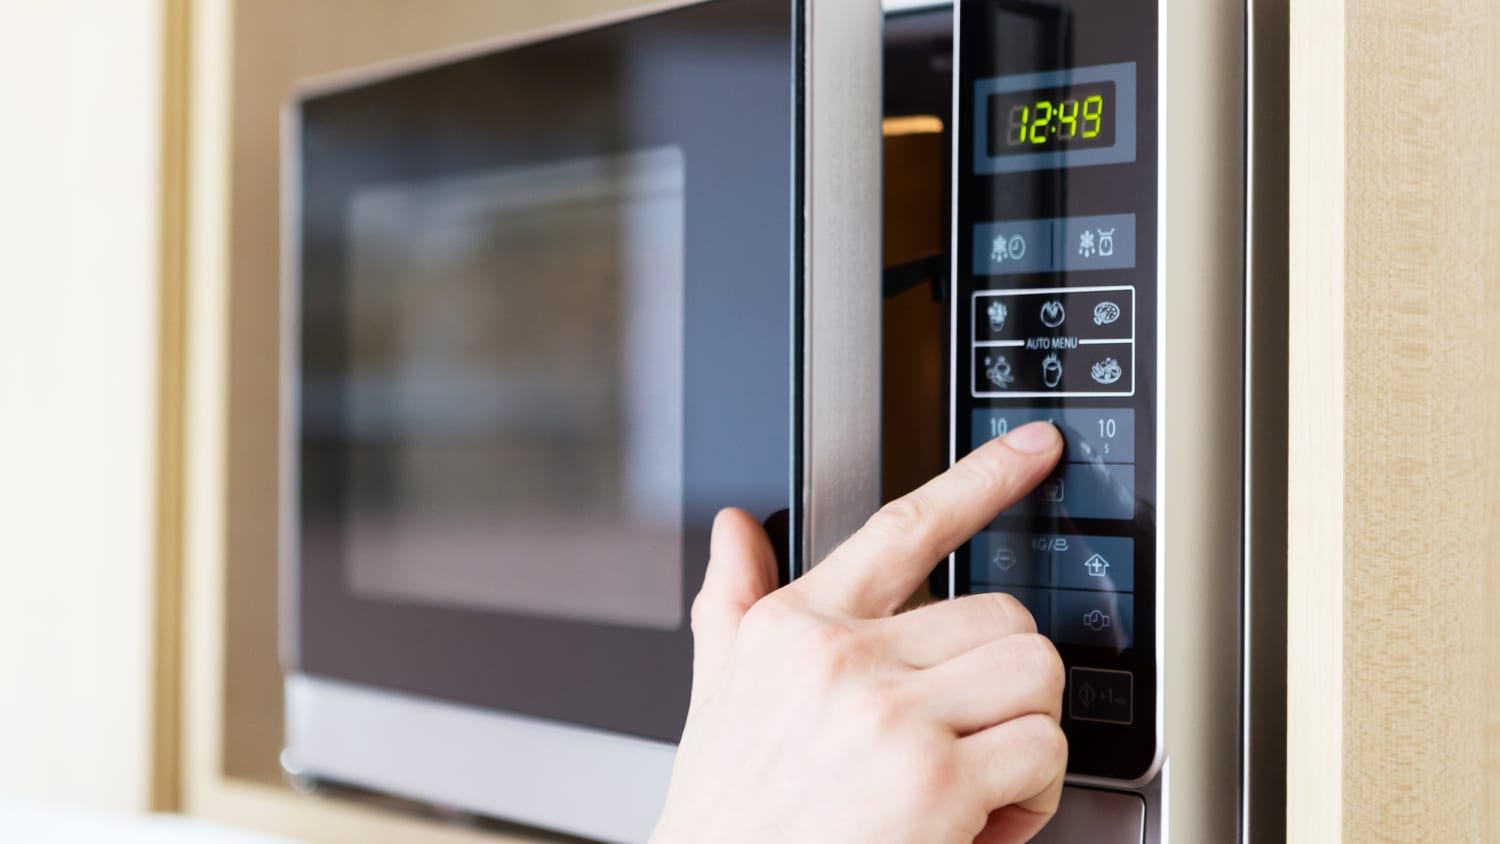 What can and can't go in a microwave